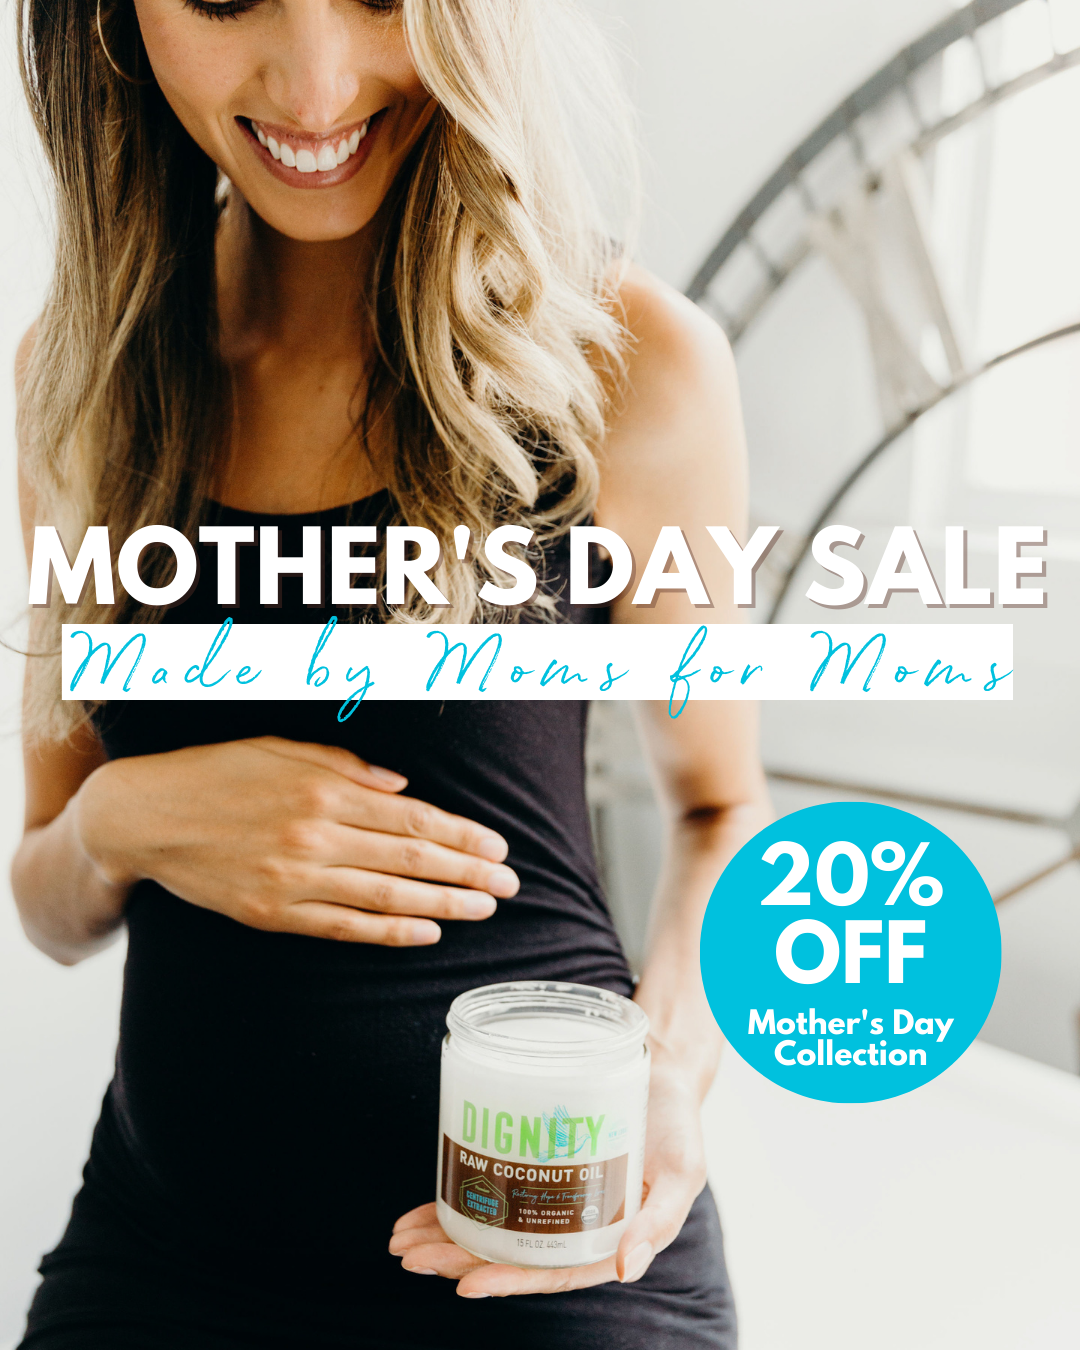 Dignity Coconuts holding a Mother’s Day season promo with 20% off on beauty bundles